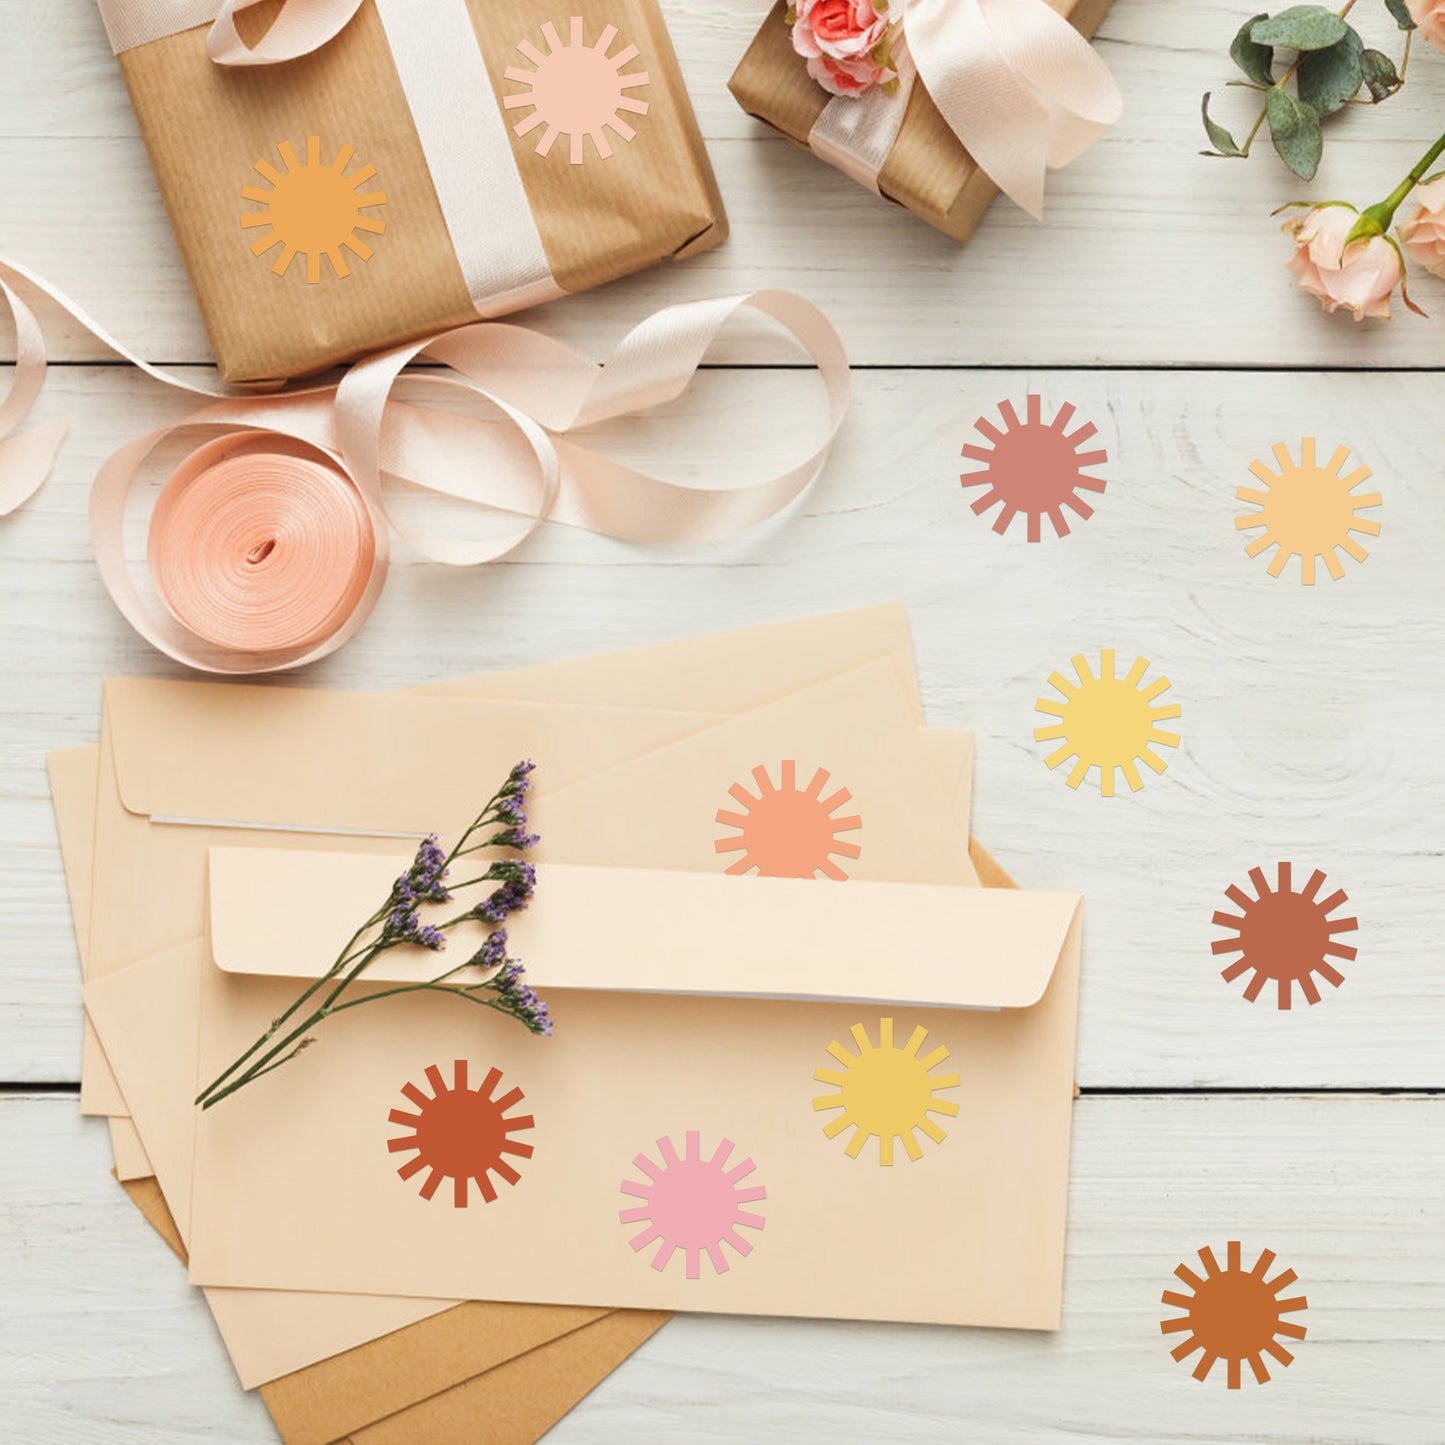 G1ngtar 1000Pcs Boho Sun Stickers Roll First Trip Around The Sun Birthday Party Favor Stickers You are My Muted Sunshine Envelope Sticker Seals Baby Shower Party Decoration Supplies for Boys Girls